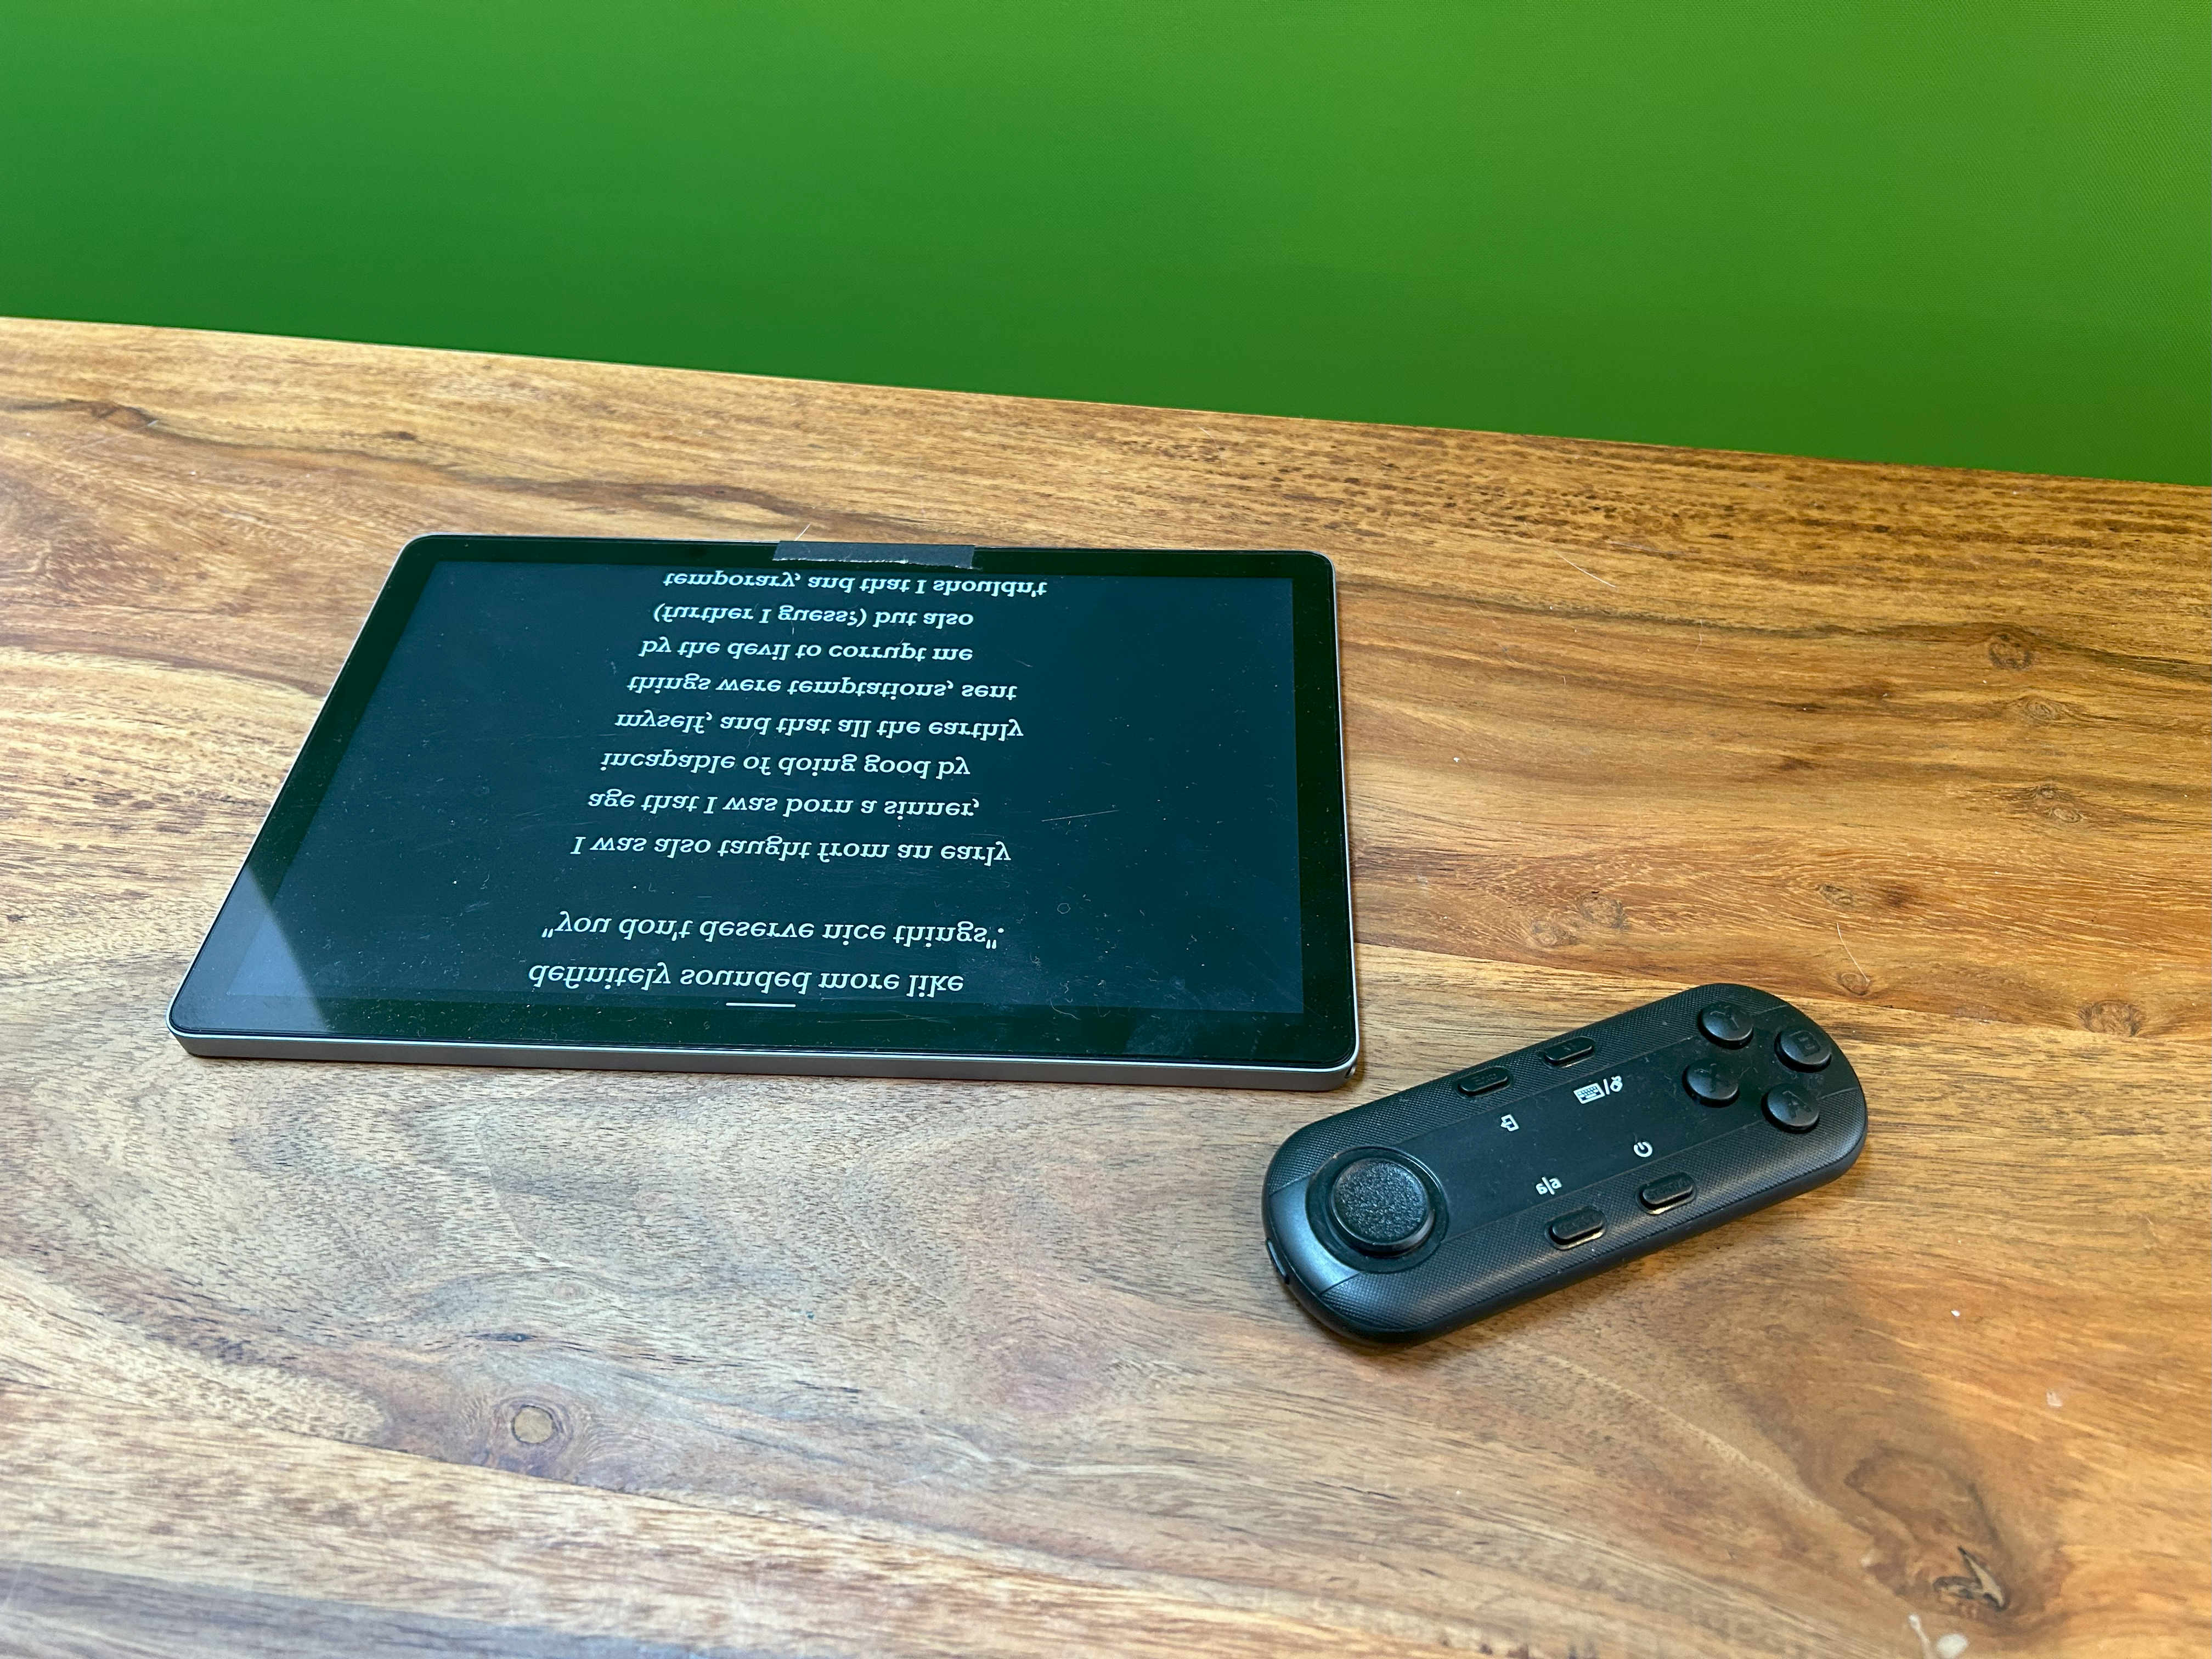 My shitty Android tablet with the remote